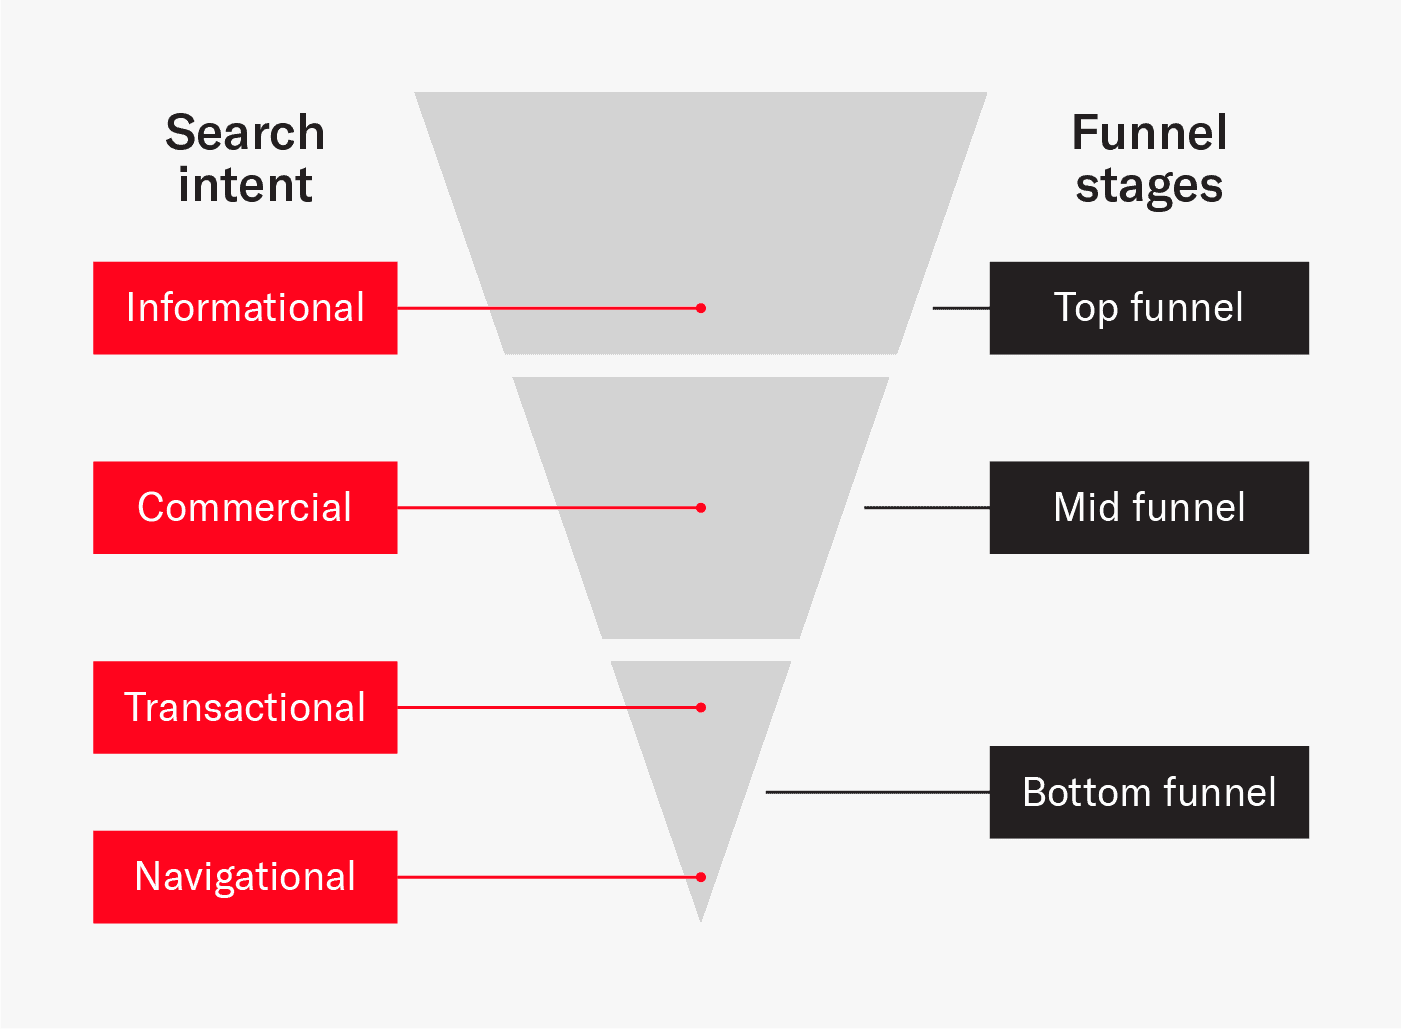 top funnel stages have informational search intent, while lower funnel stages have commercial, transactional, or navigational search intent. 